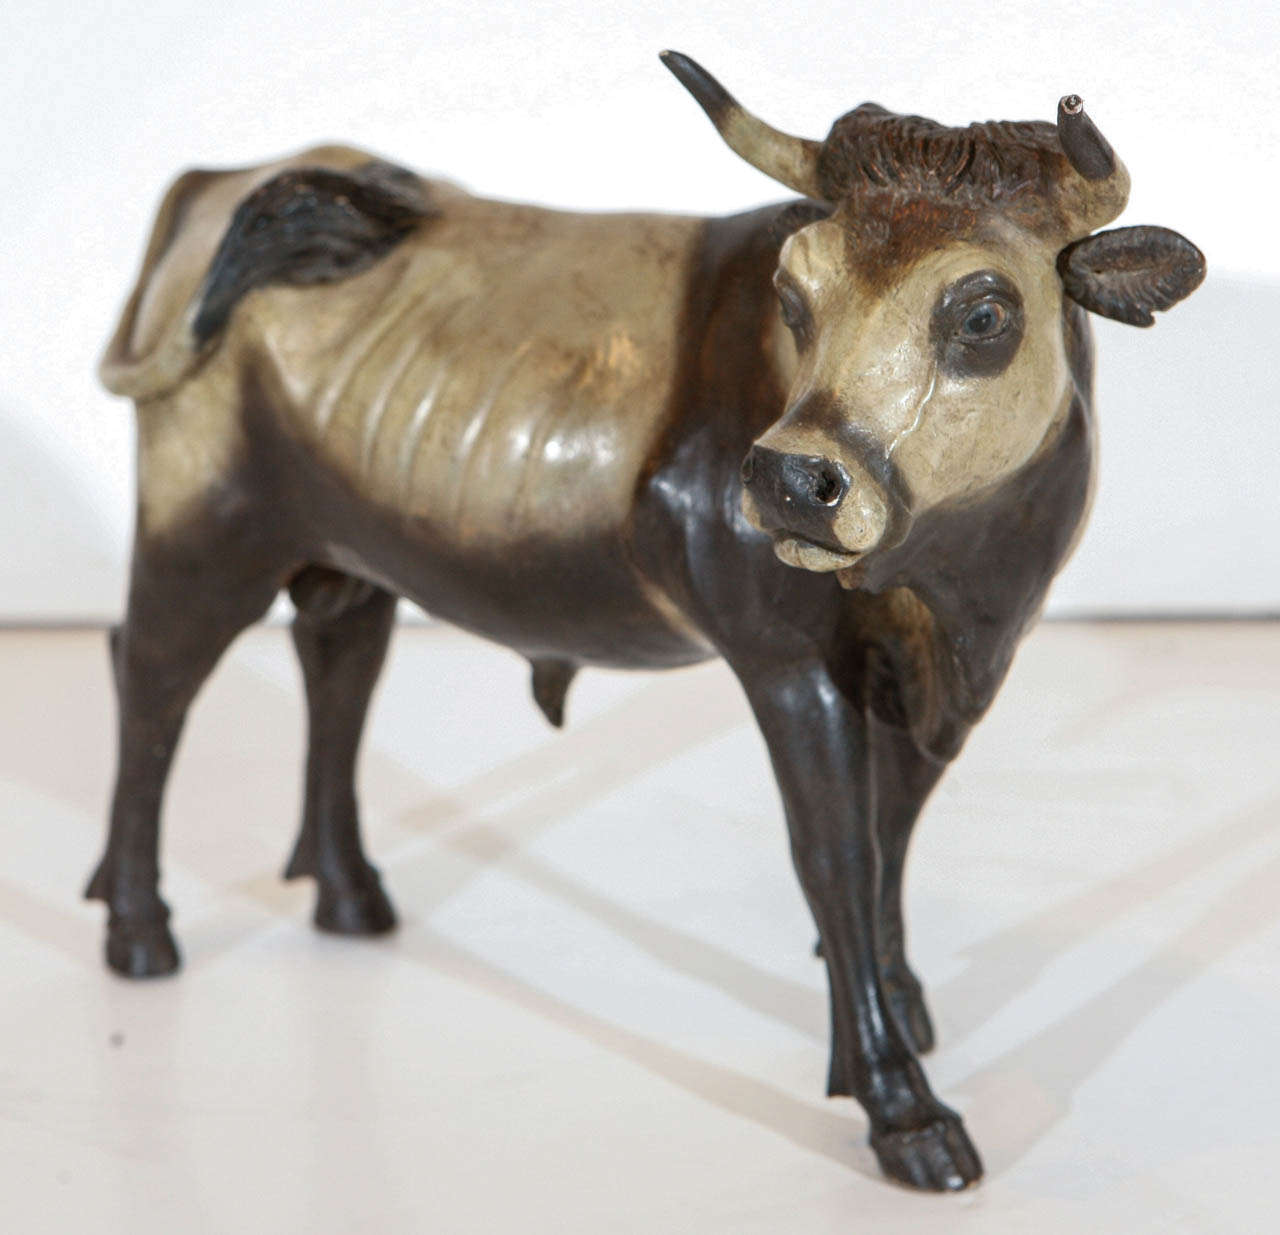 Rare, beautifully hand-carved and painted bull figurine with glass eyes from Naples, Italy. Originally intended for a nativity scene.